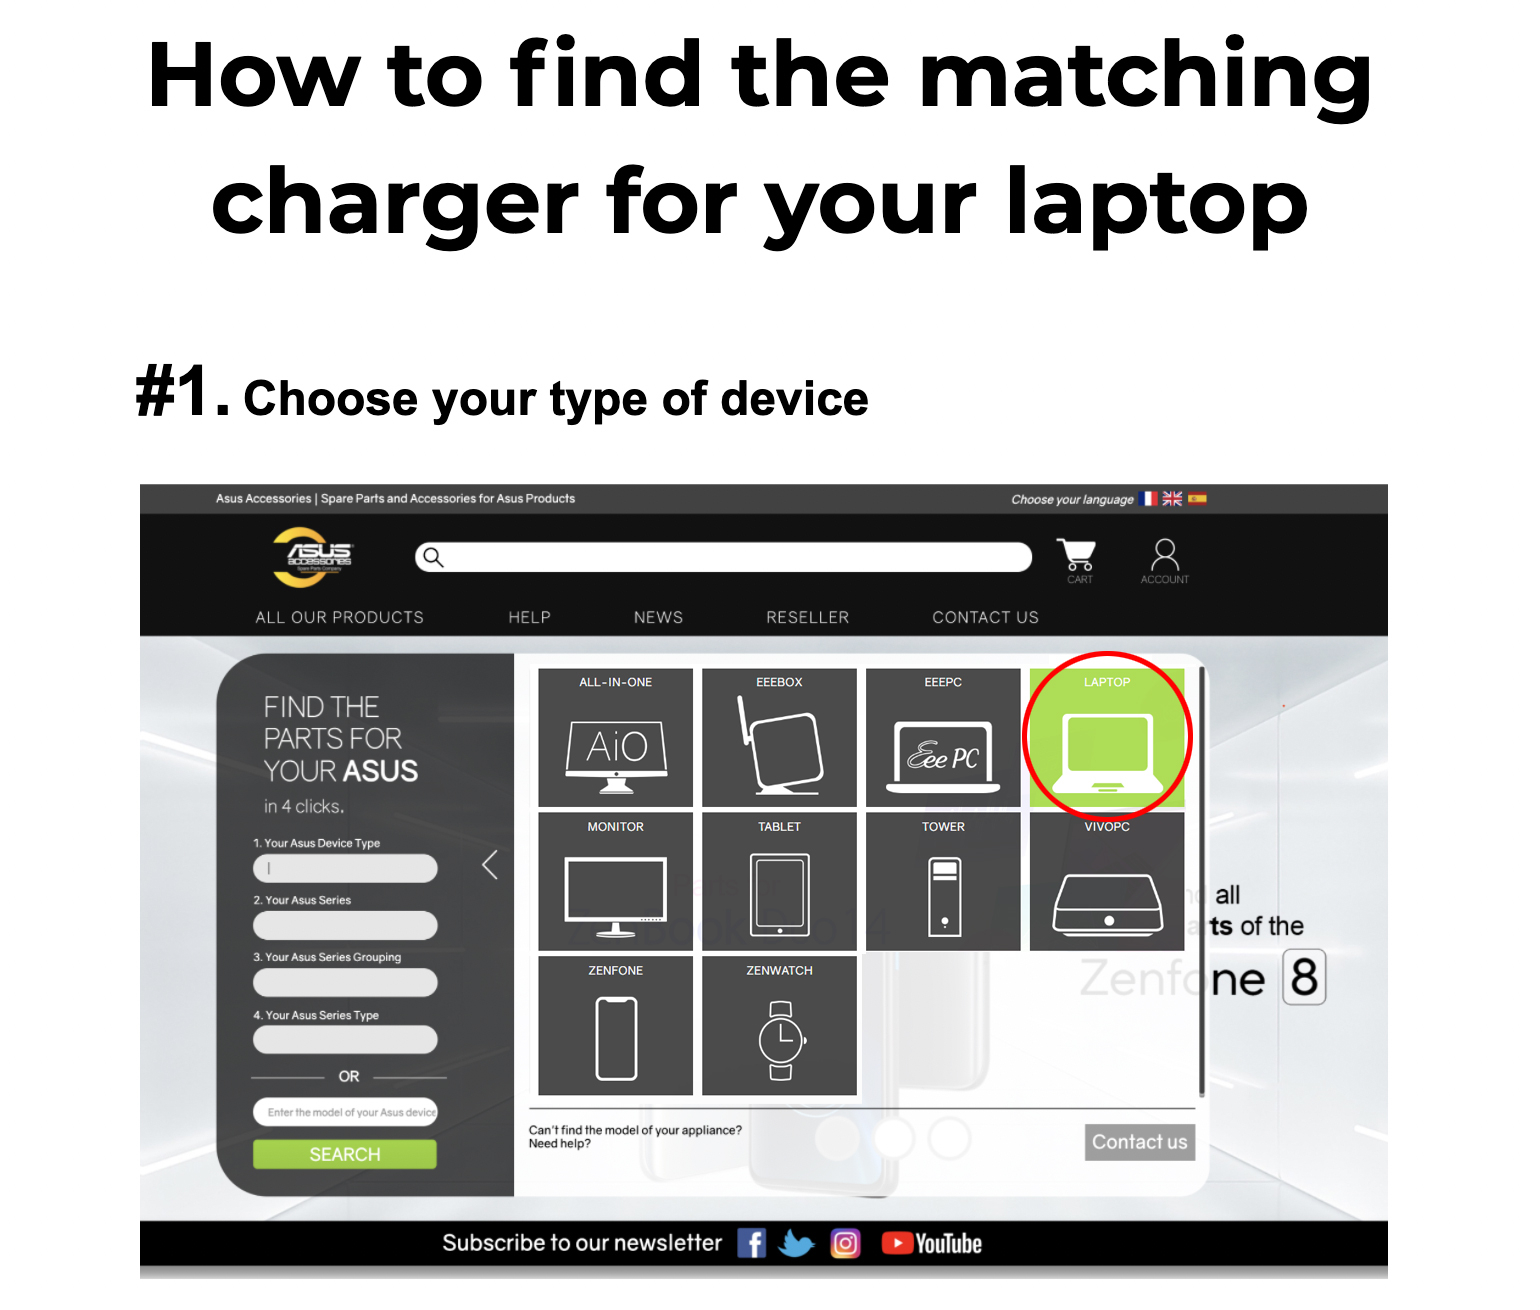 How to find the matching charger to your laptop